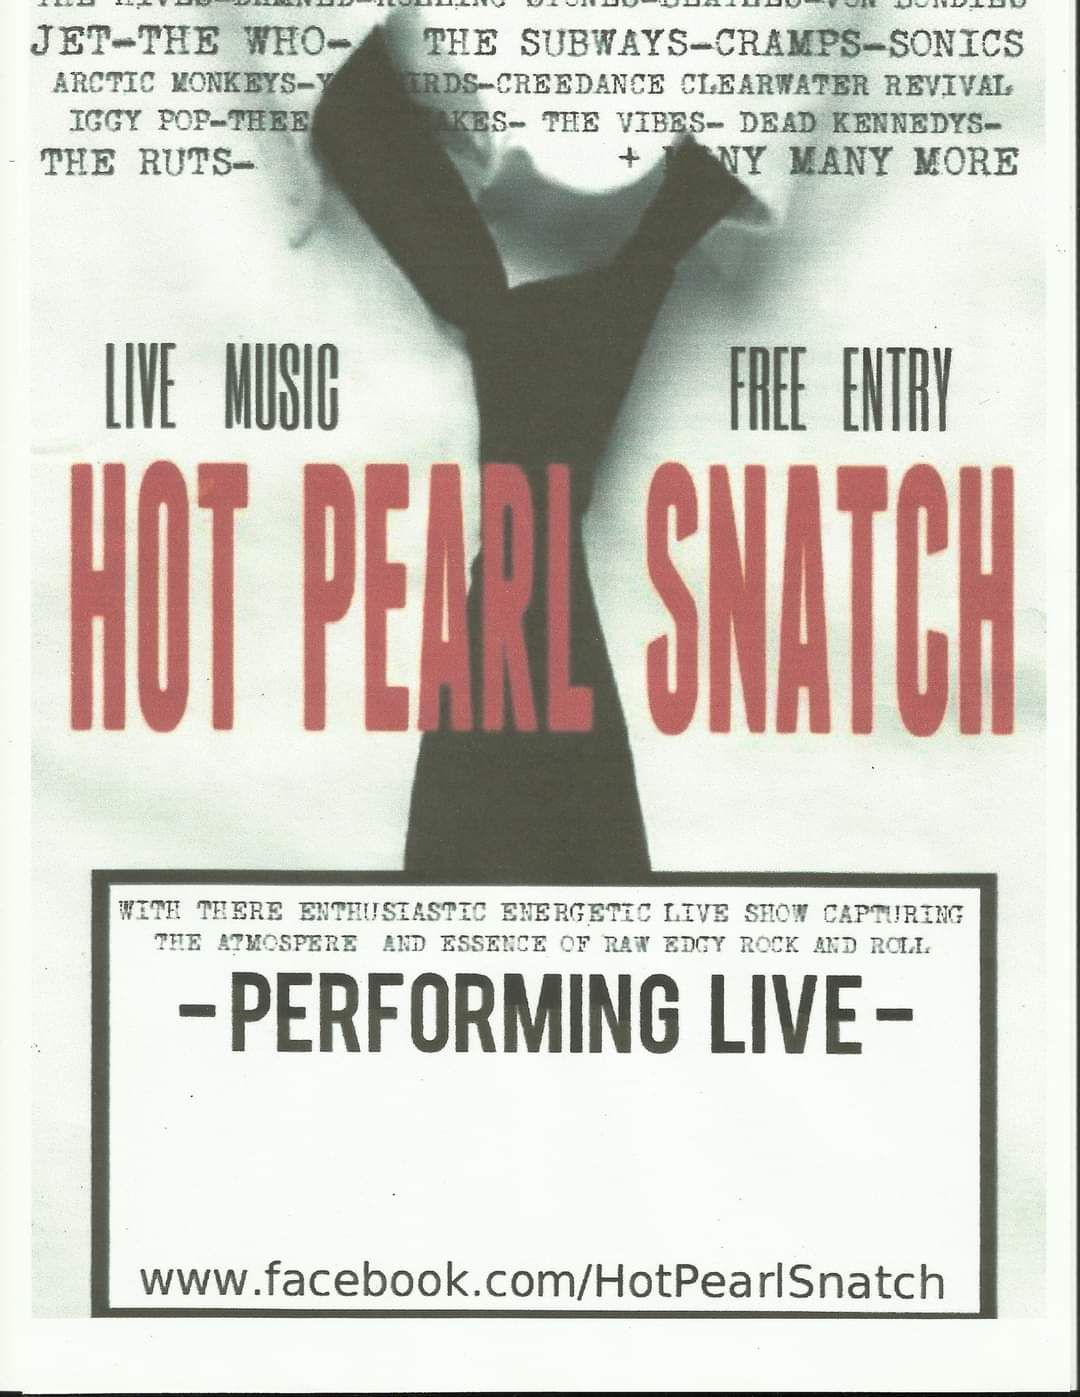 LIVE MUSIC - Hot Pearl Snatch